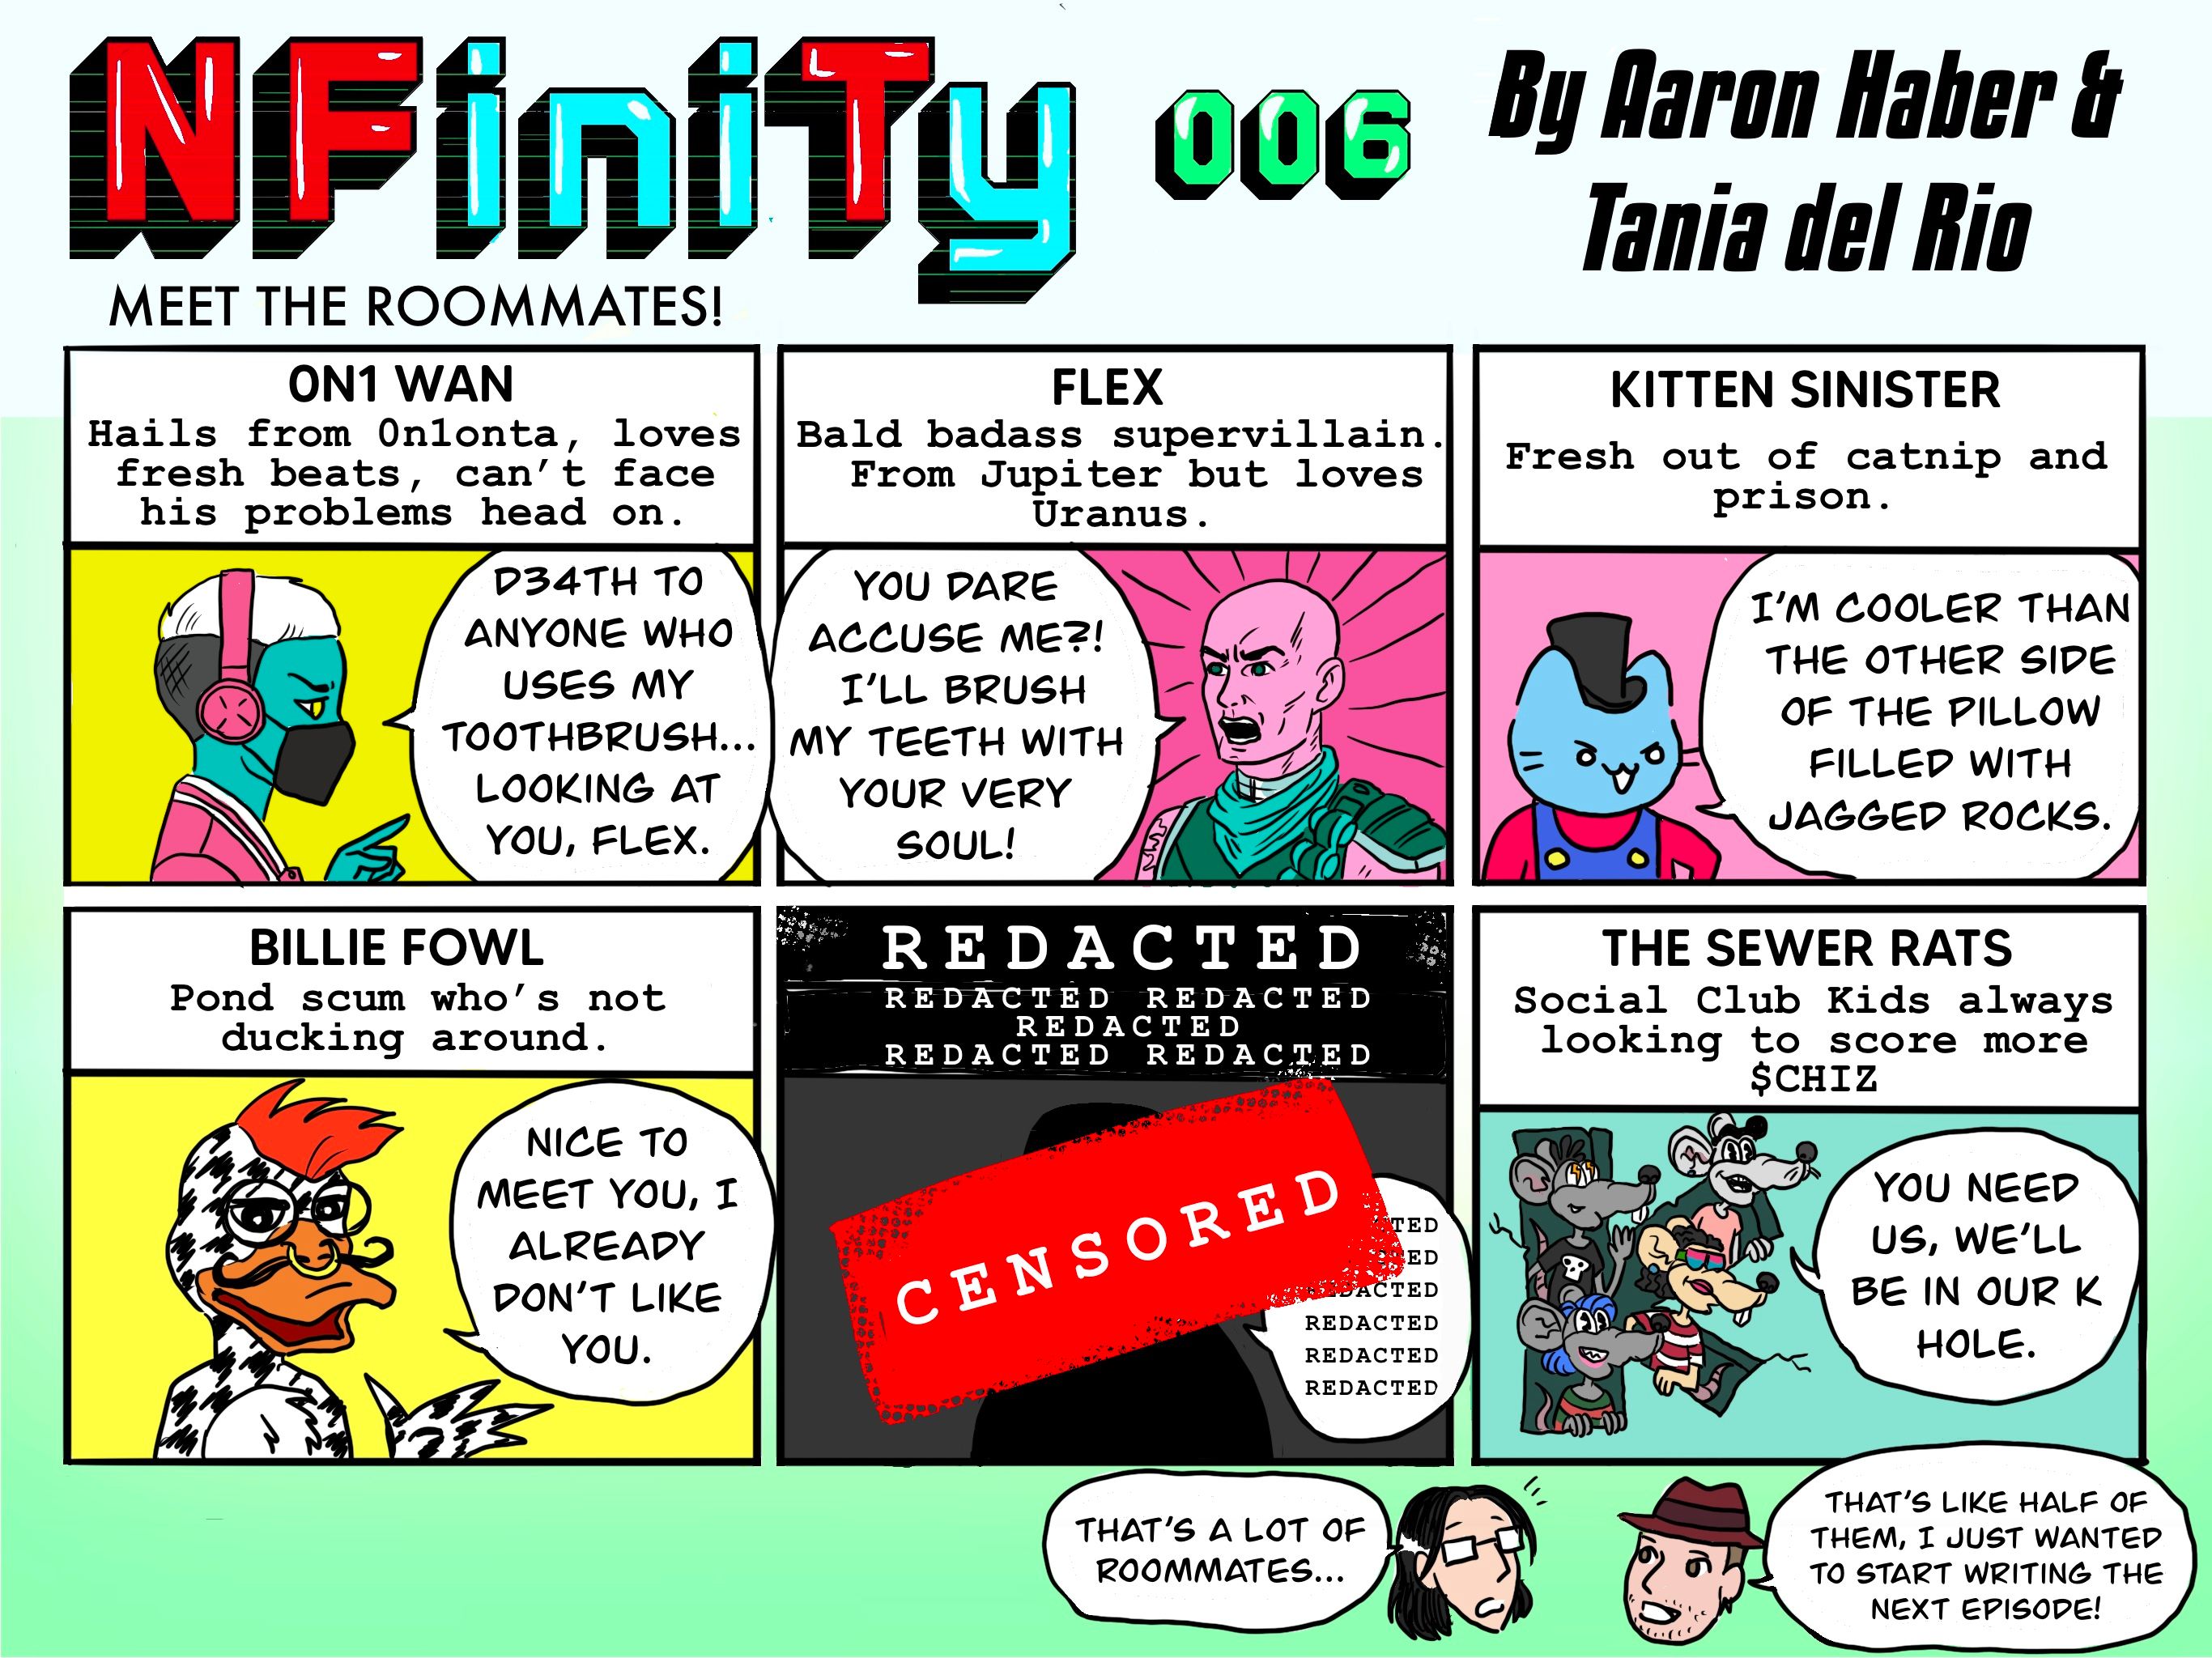 NFinity: The Comic Strip Series - Episode 006